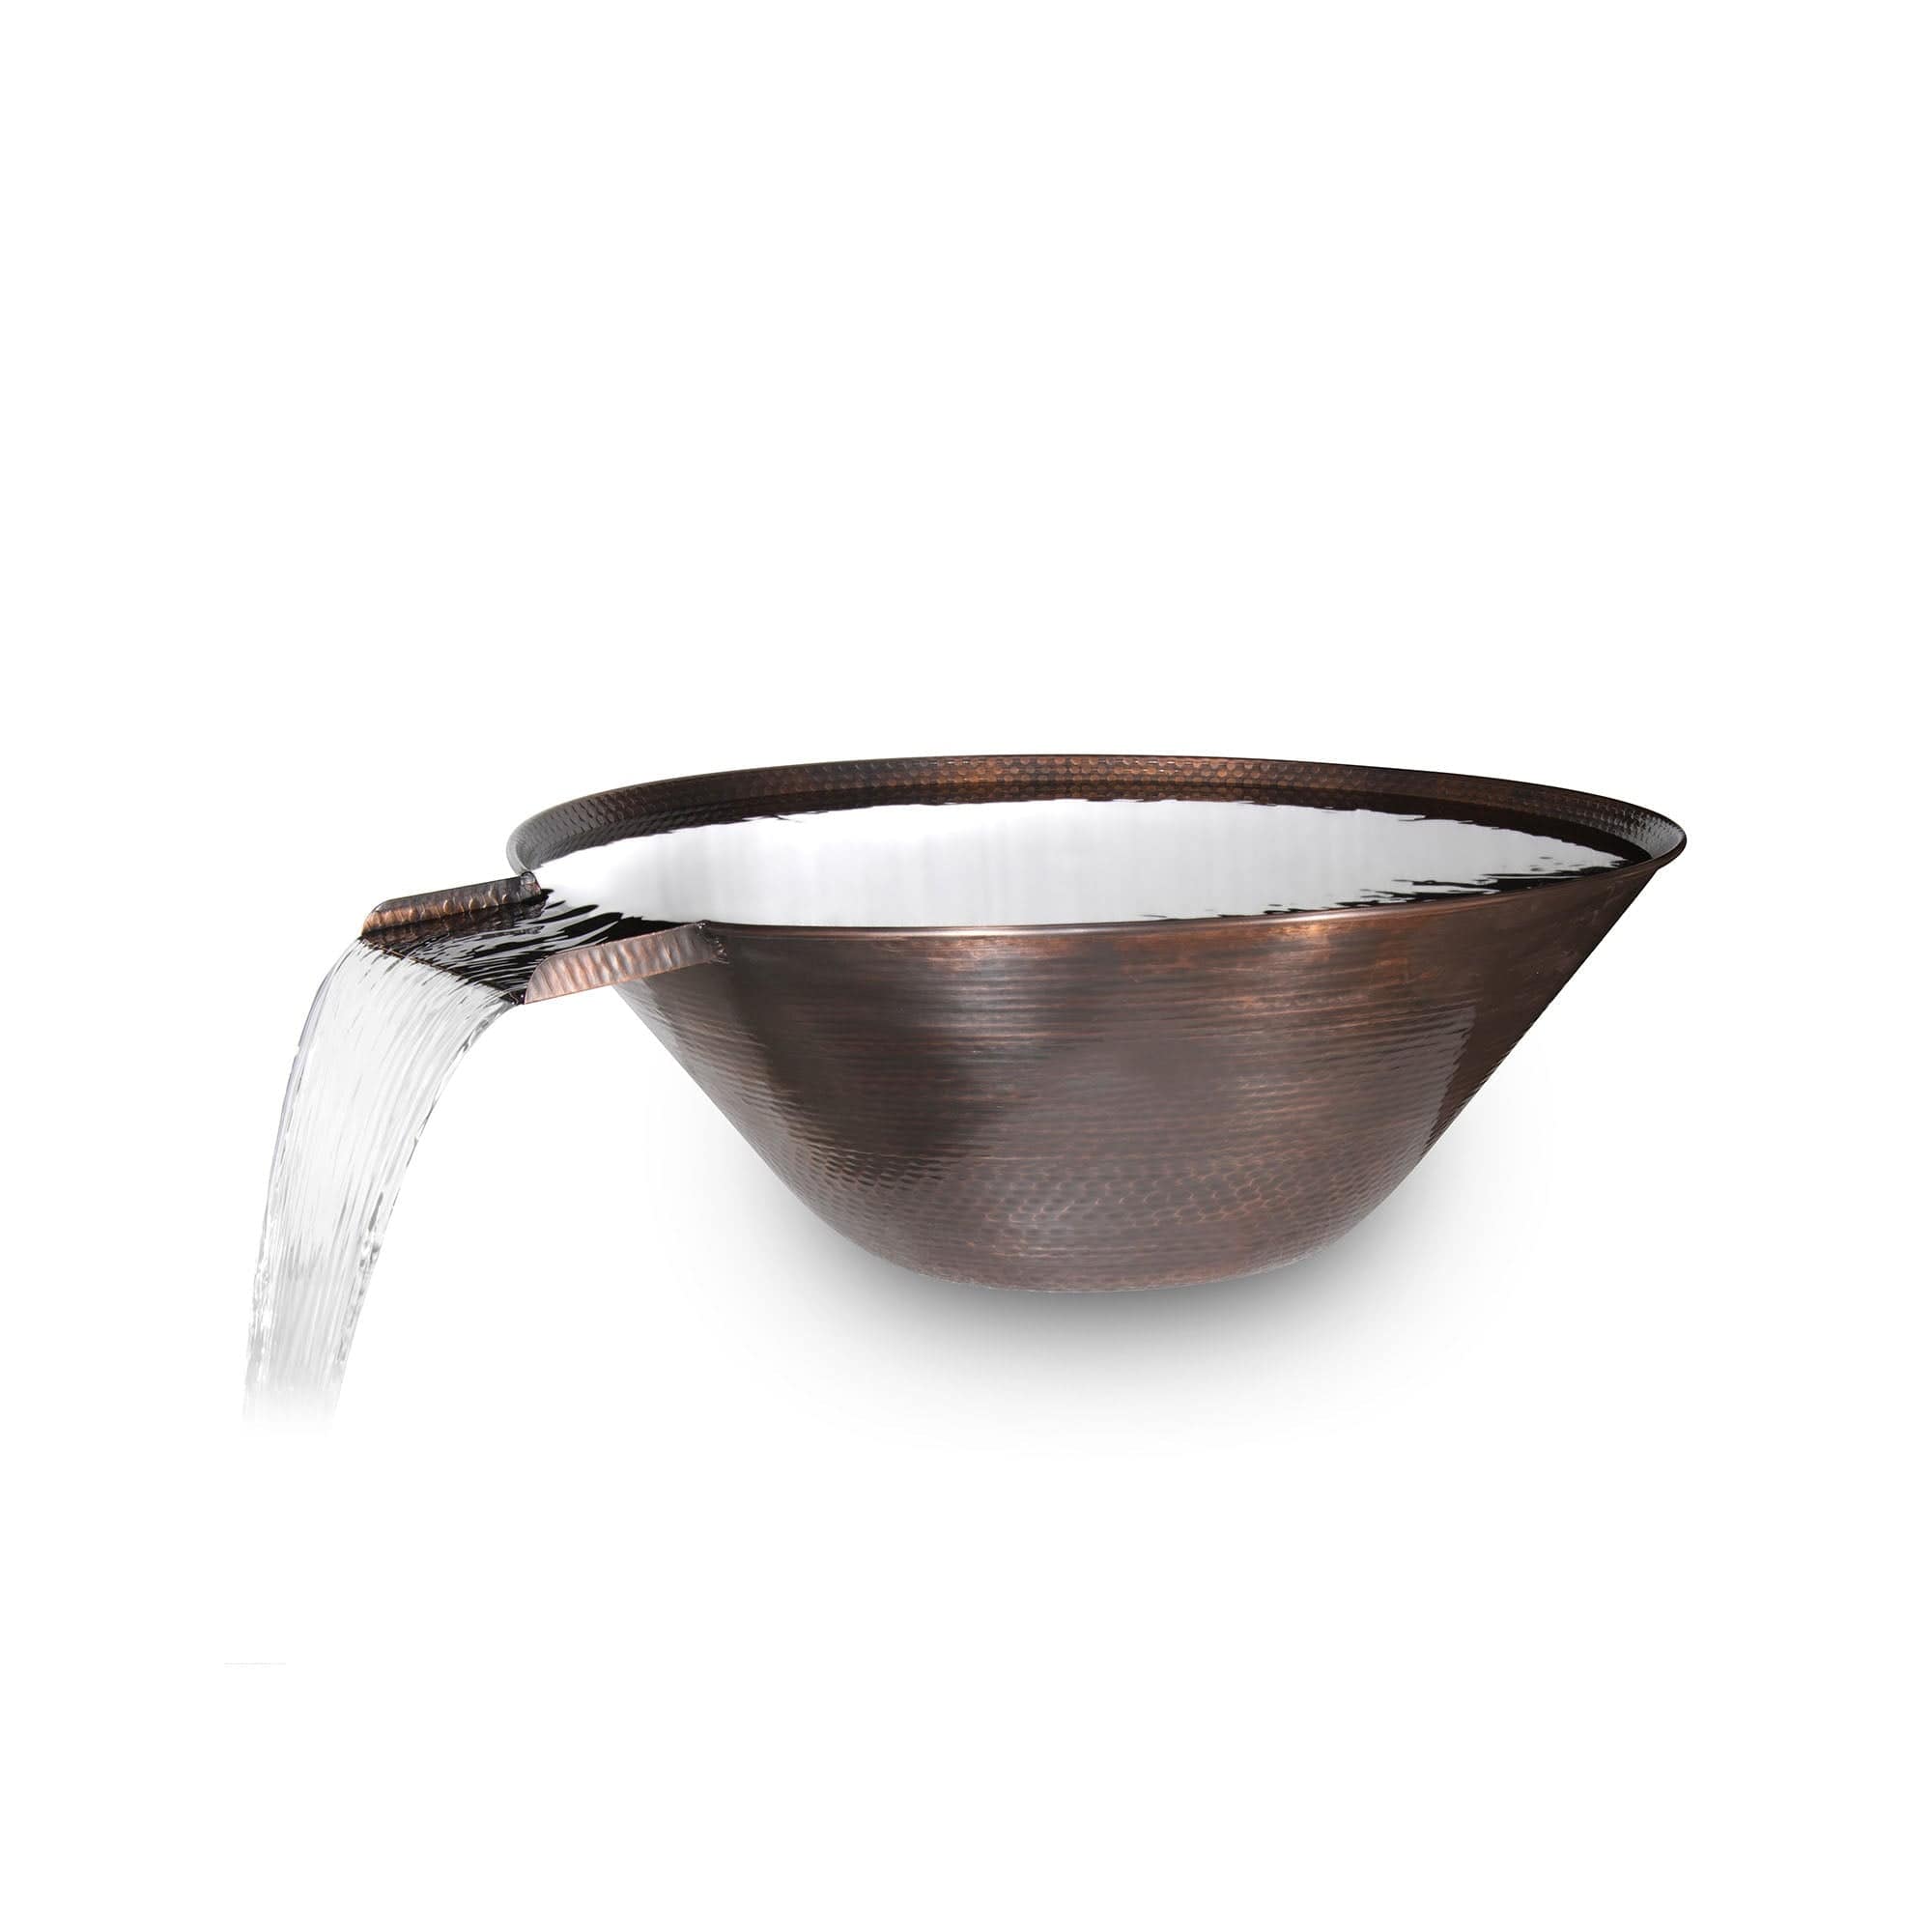 The Outdoor Plus Water Bowl The Outdoor Plus Remi 31" Water Bowl | Hammered Copper OPT-31RCWO